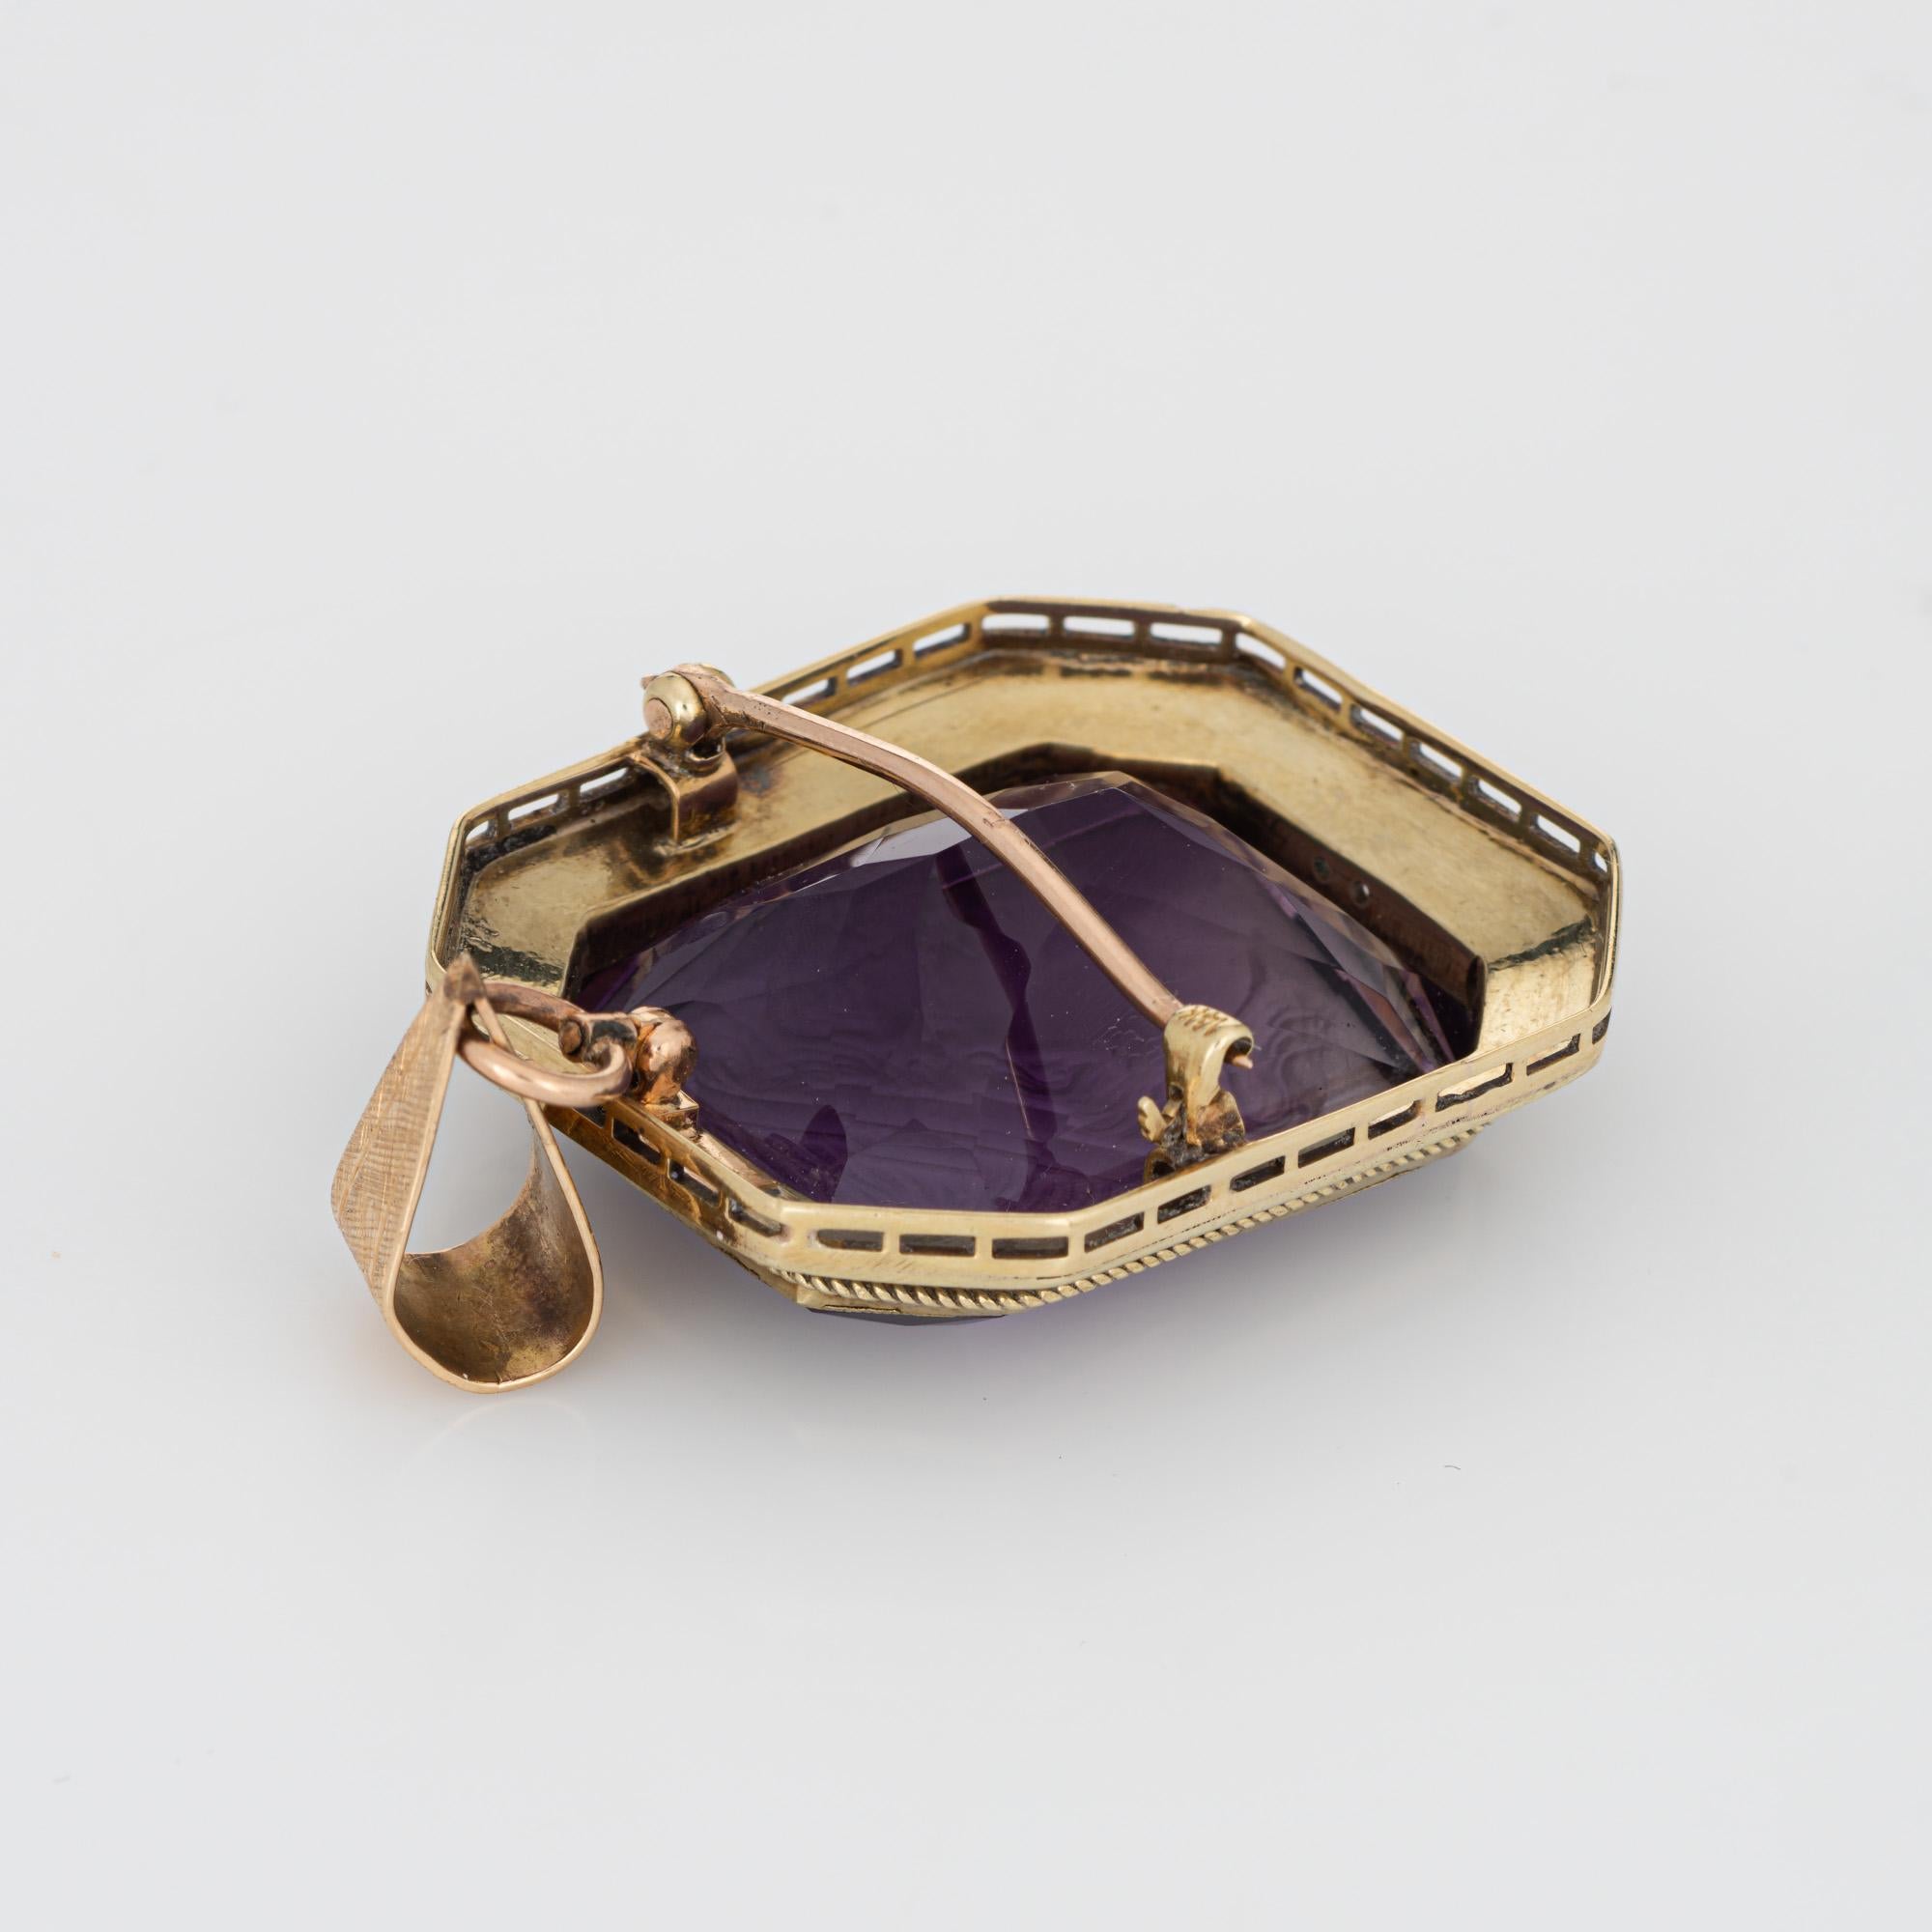 Vintage Art Deco Amethyst Intaglio Pendant Enamel 14k Yellow Gold Carved   In Good Condition For Sale In Torrance, CA